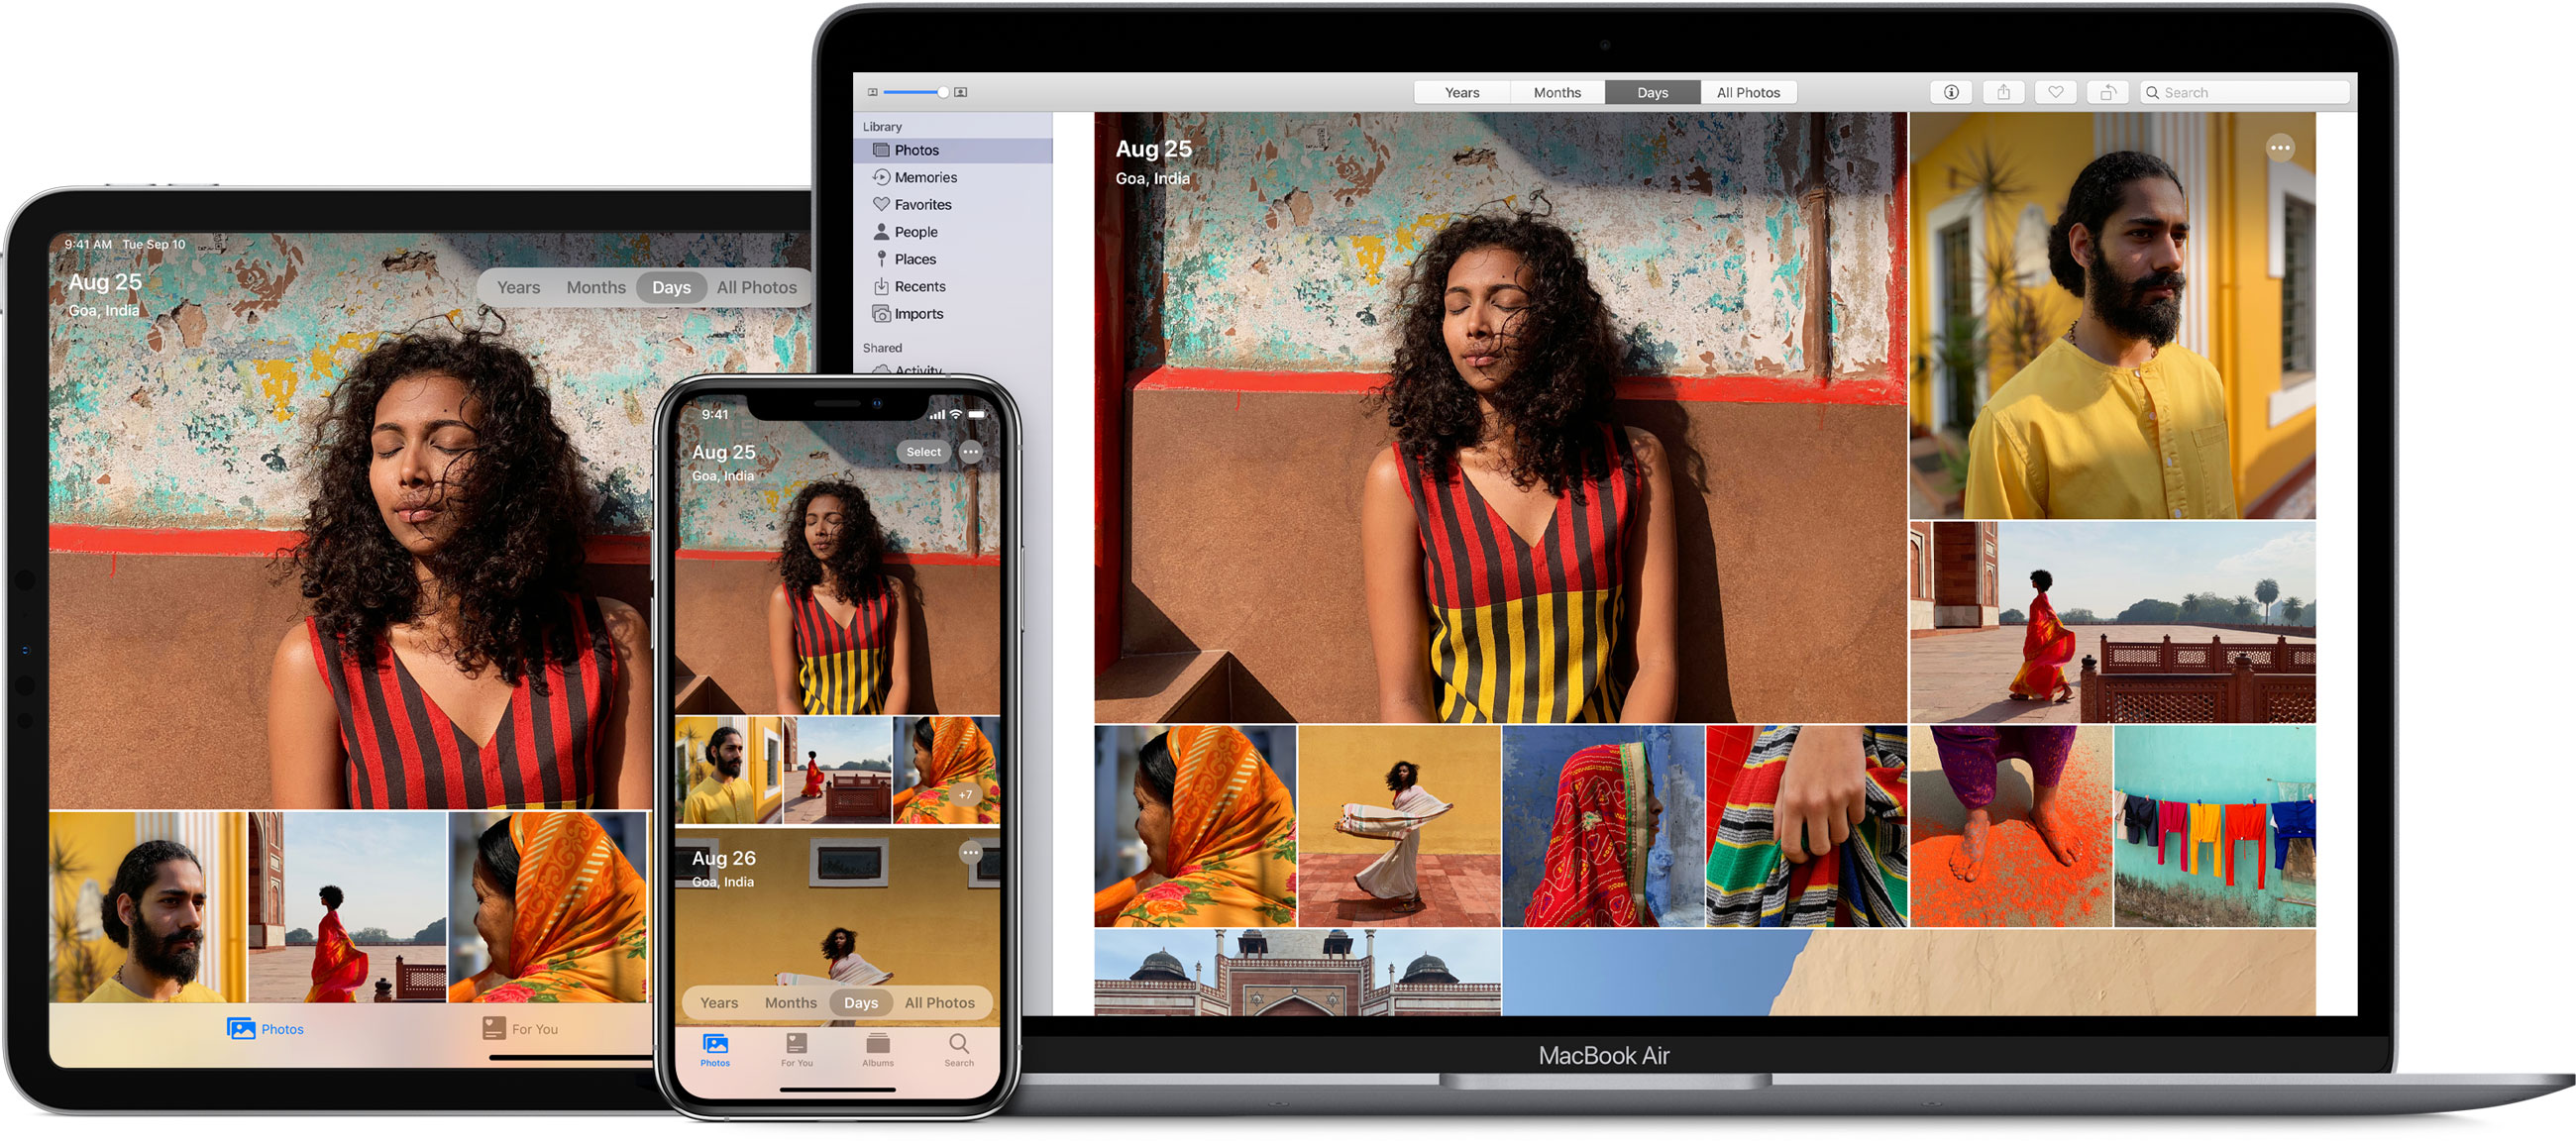 mac iphoto library manager